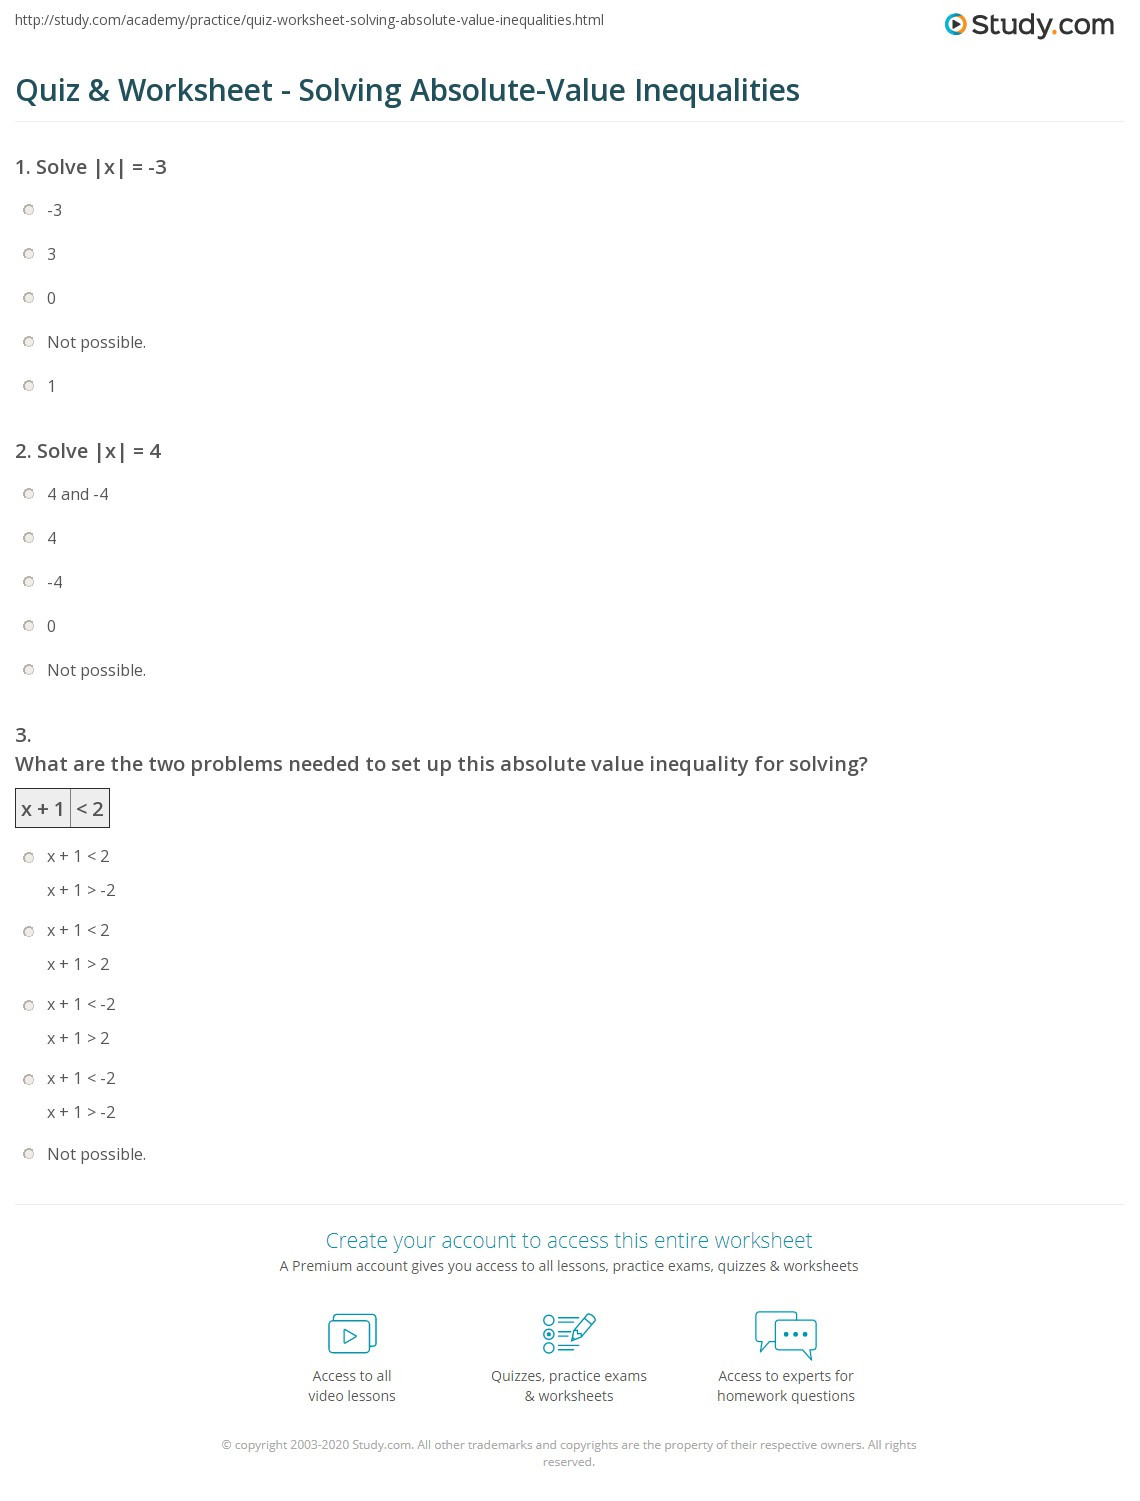 Solving Absolute Value Equations Worksheet Quiz &amp; Worksheet solving Absolute Value Inequalities